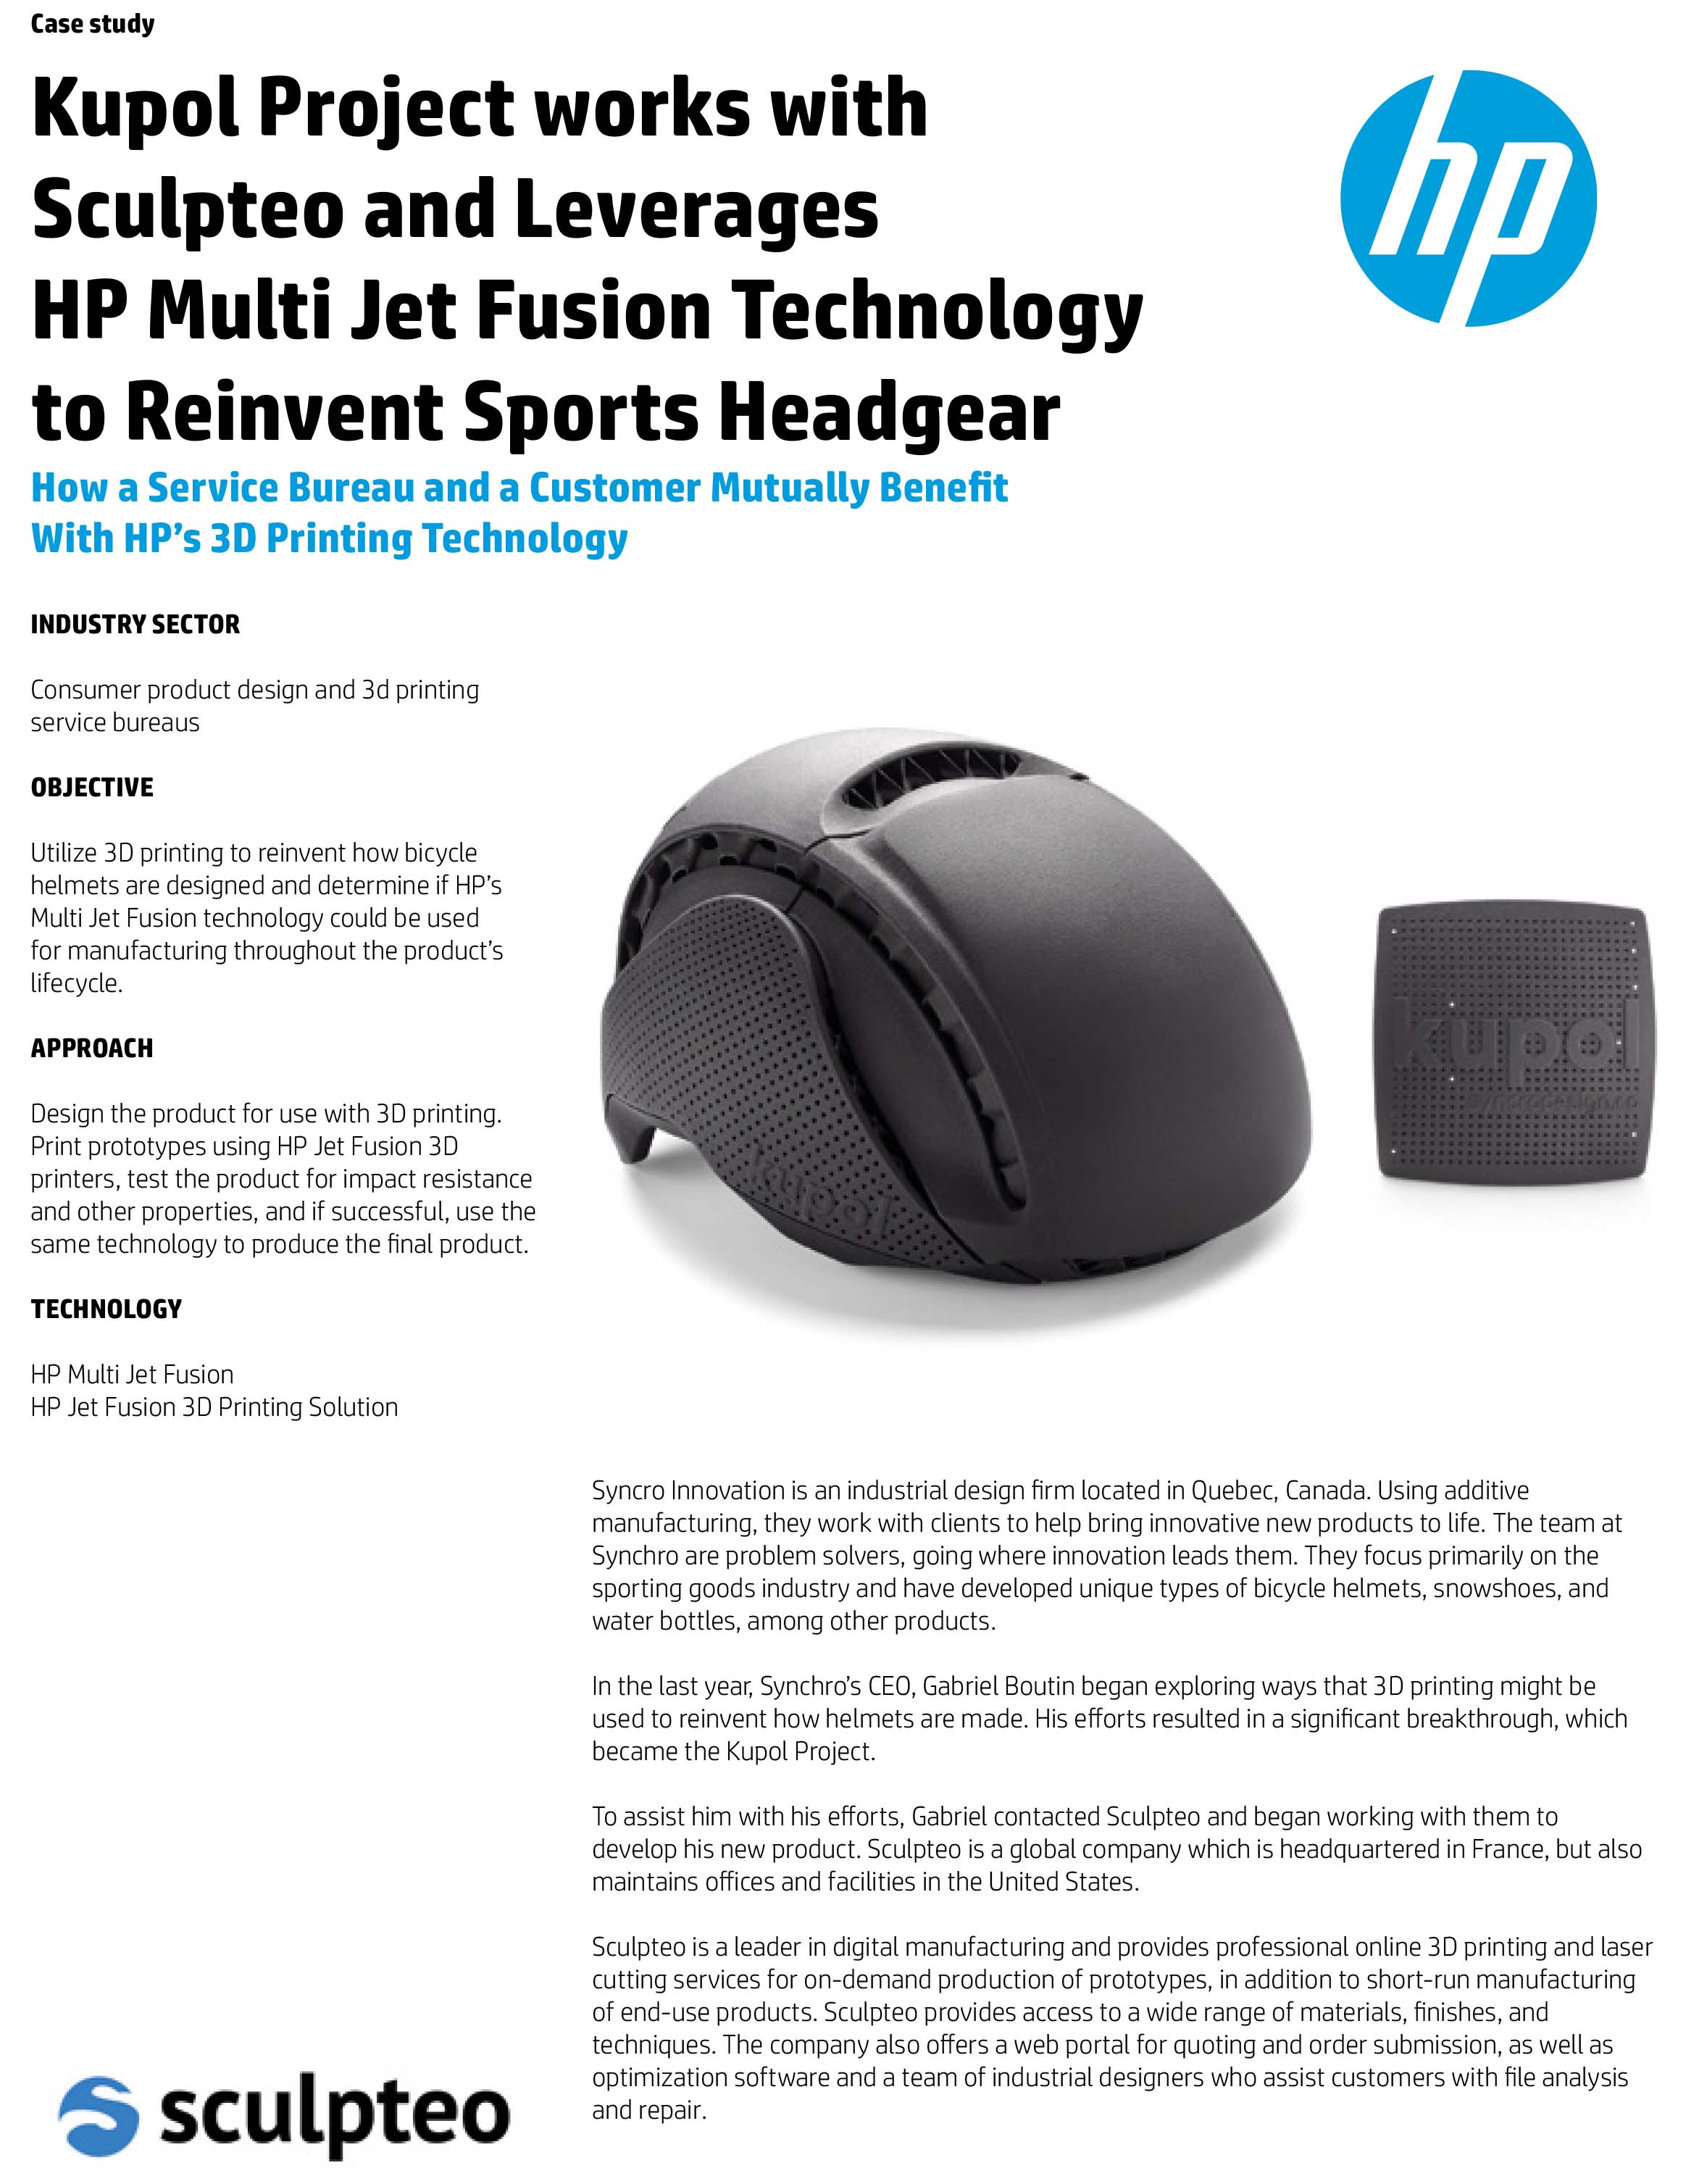 Kupol Project works with Sculpteo and Leverages HP Multi Jet Fusion Technology to Reinvent Sports Headgear